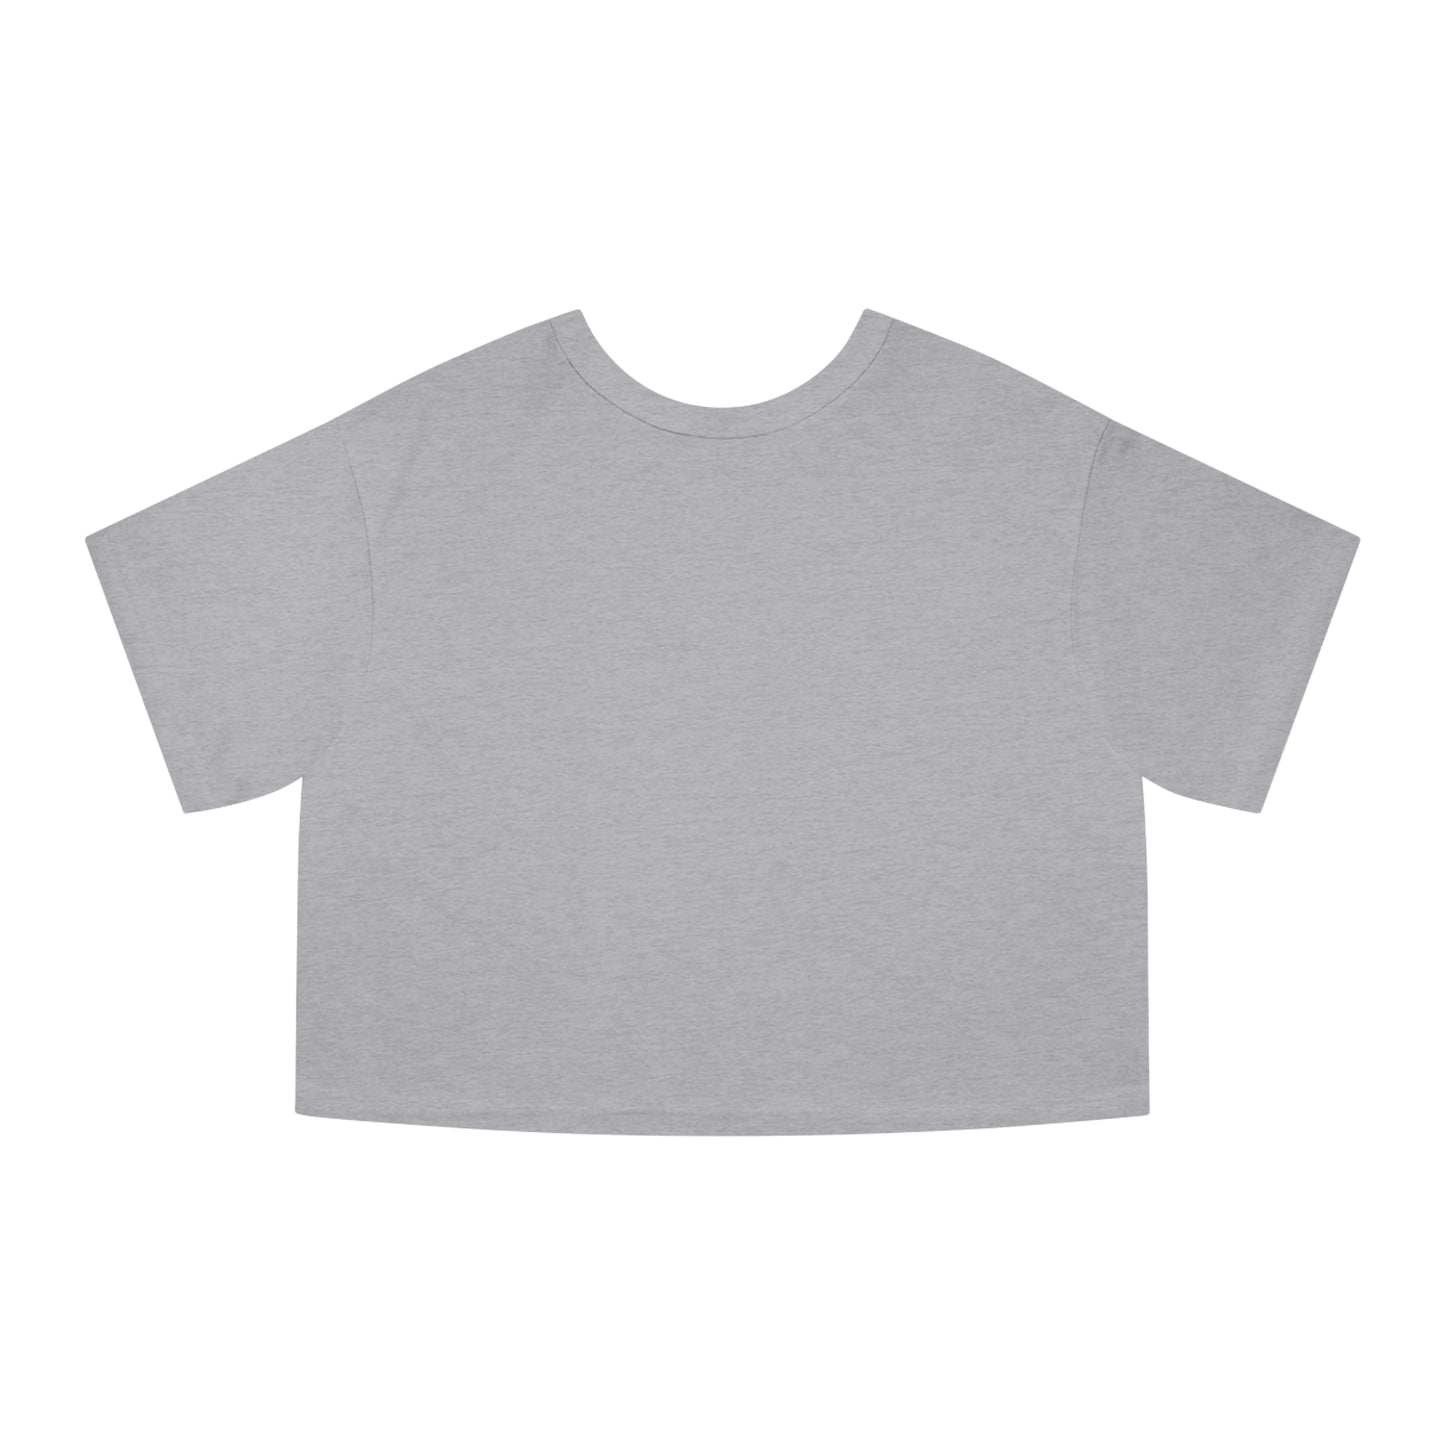 Champion Women's Heritage Cropped T-Shirt, SOCCER